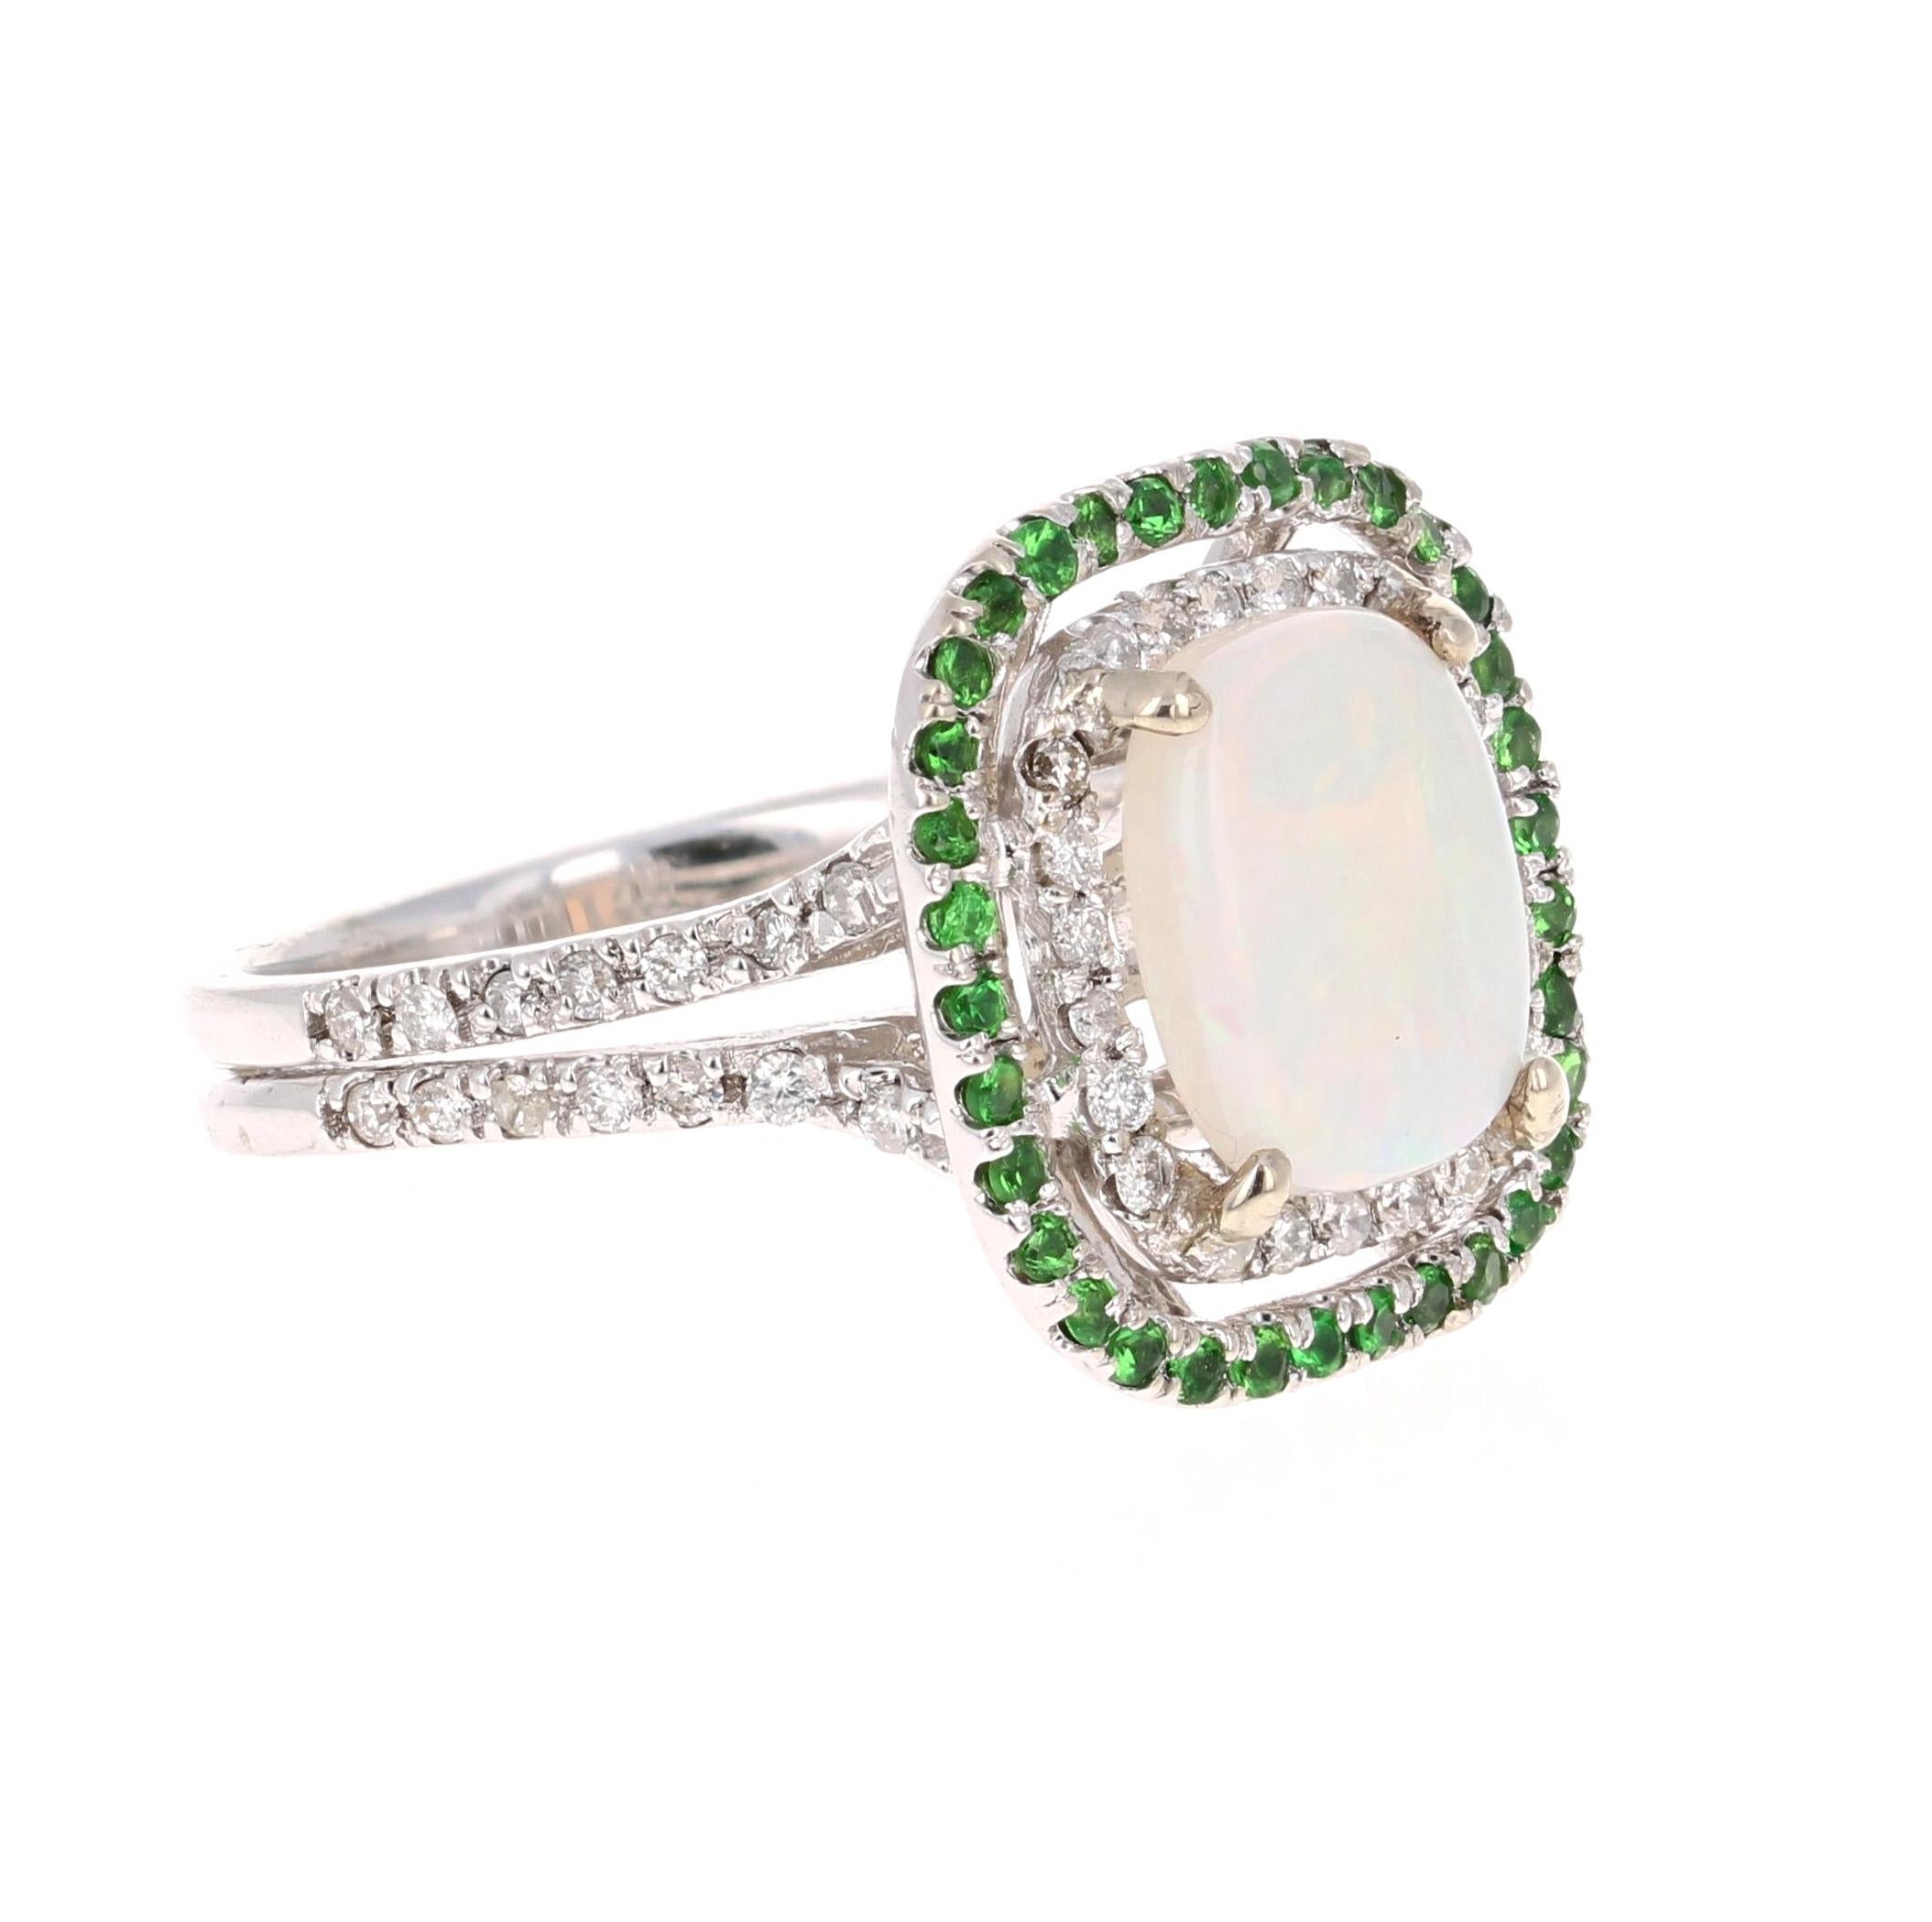 Stunning and uniquely designed 6.68 Carat Oval Cut Opal Diamond White Gold Ring with Tsavorite accents!

The Oval Cut Opal in the center of the ring weighs 1.58 Carats.  It is surrounded by 50 Round Cut Diamonds that weigh 0.35 Carats and 34